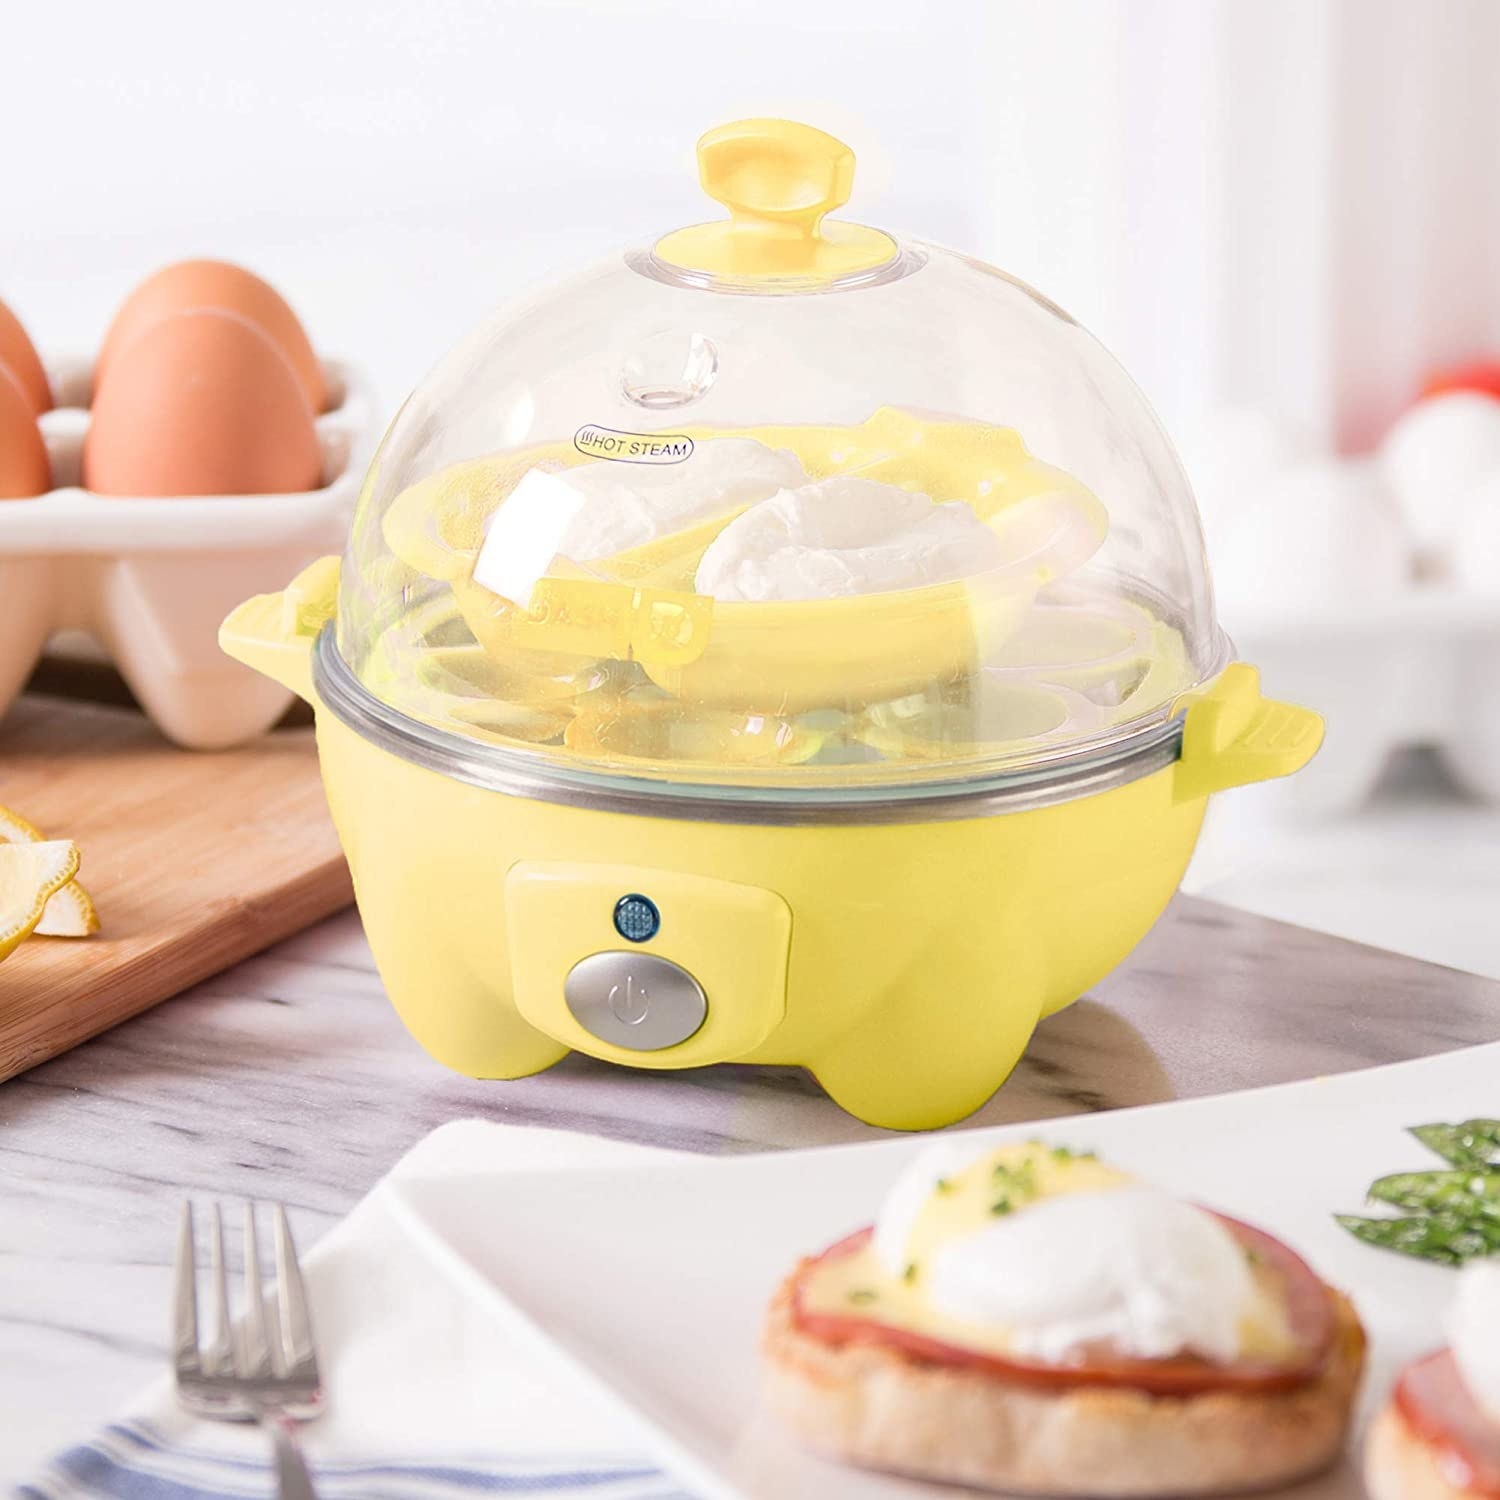 The egg cooker with poached eggs inside of it